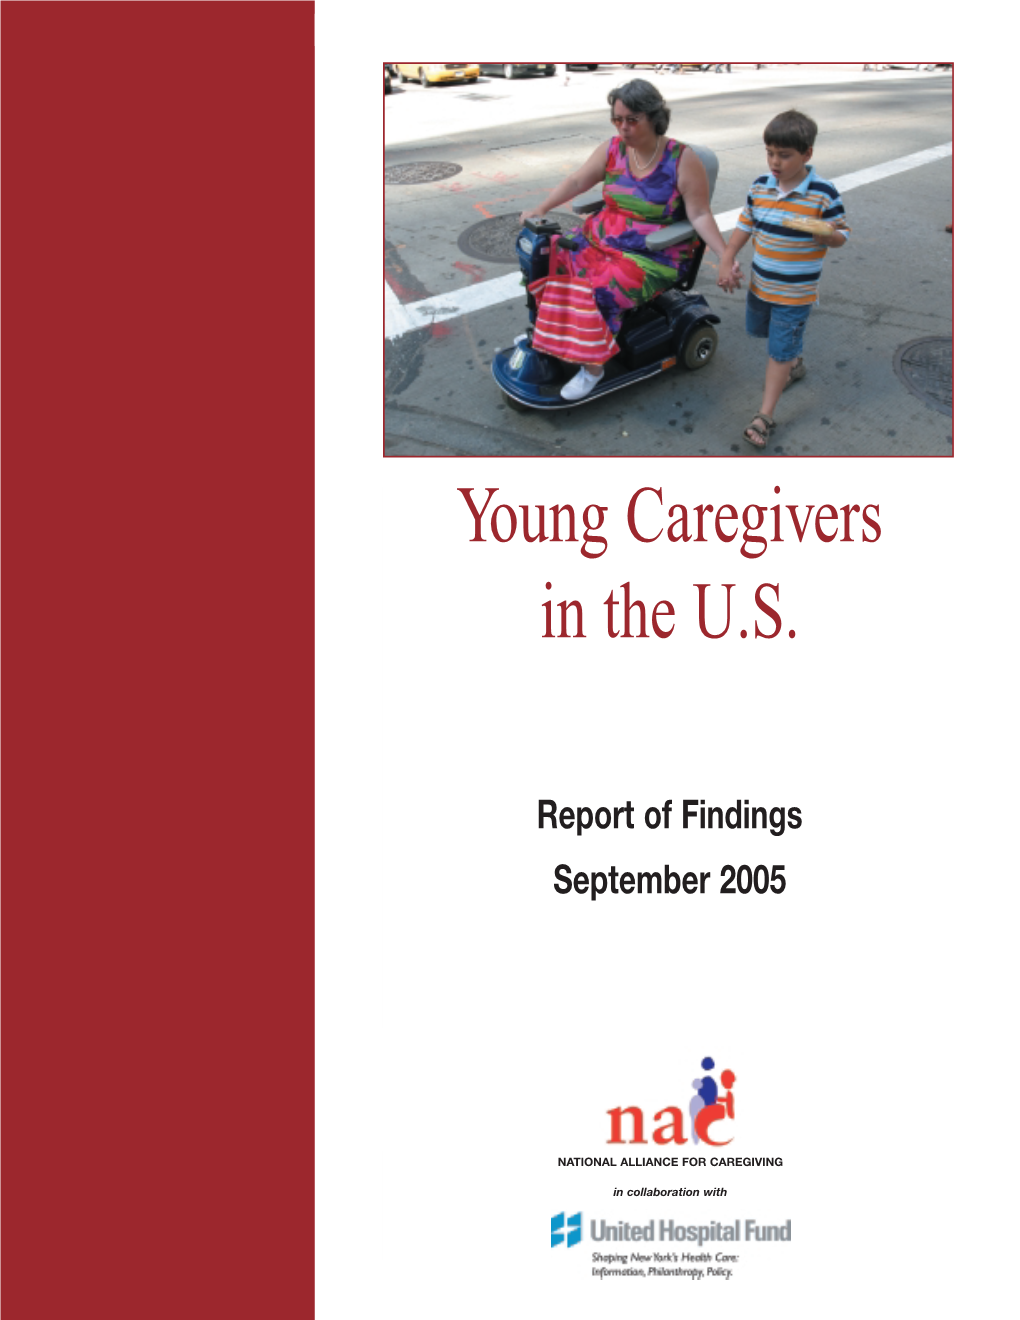 Young Caregivers in the U.S. (2005)